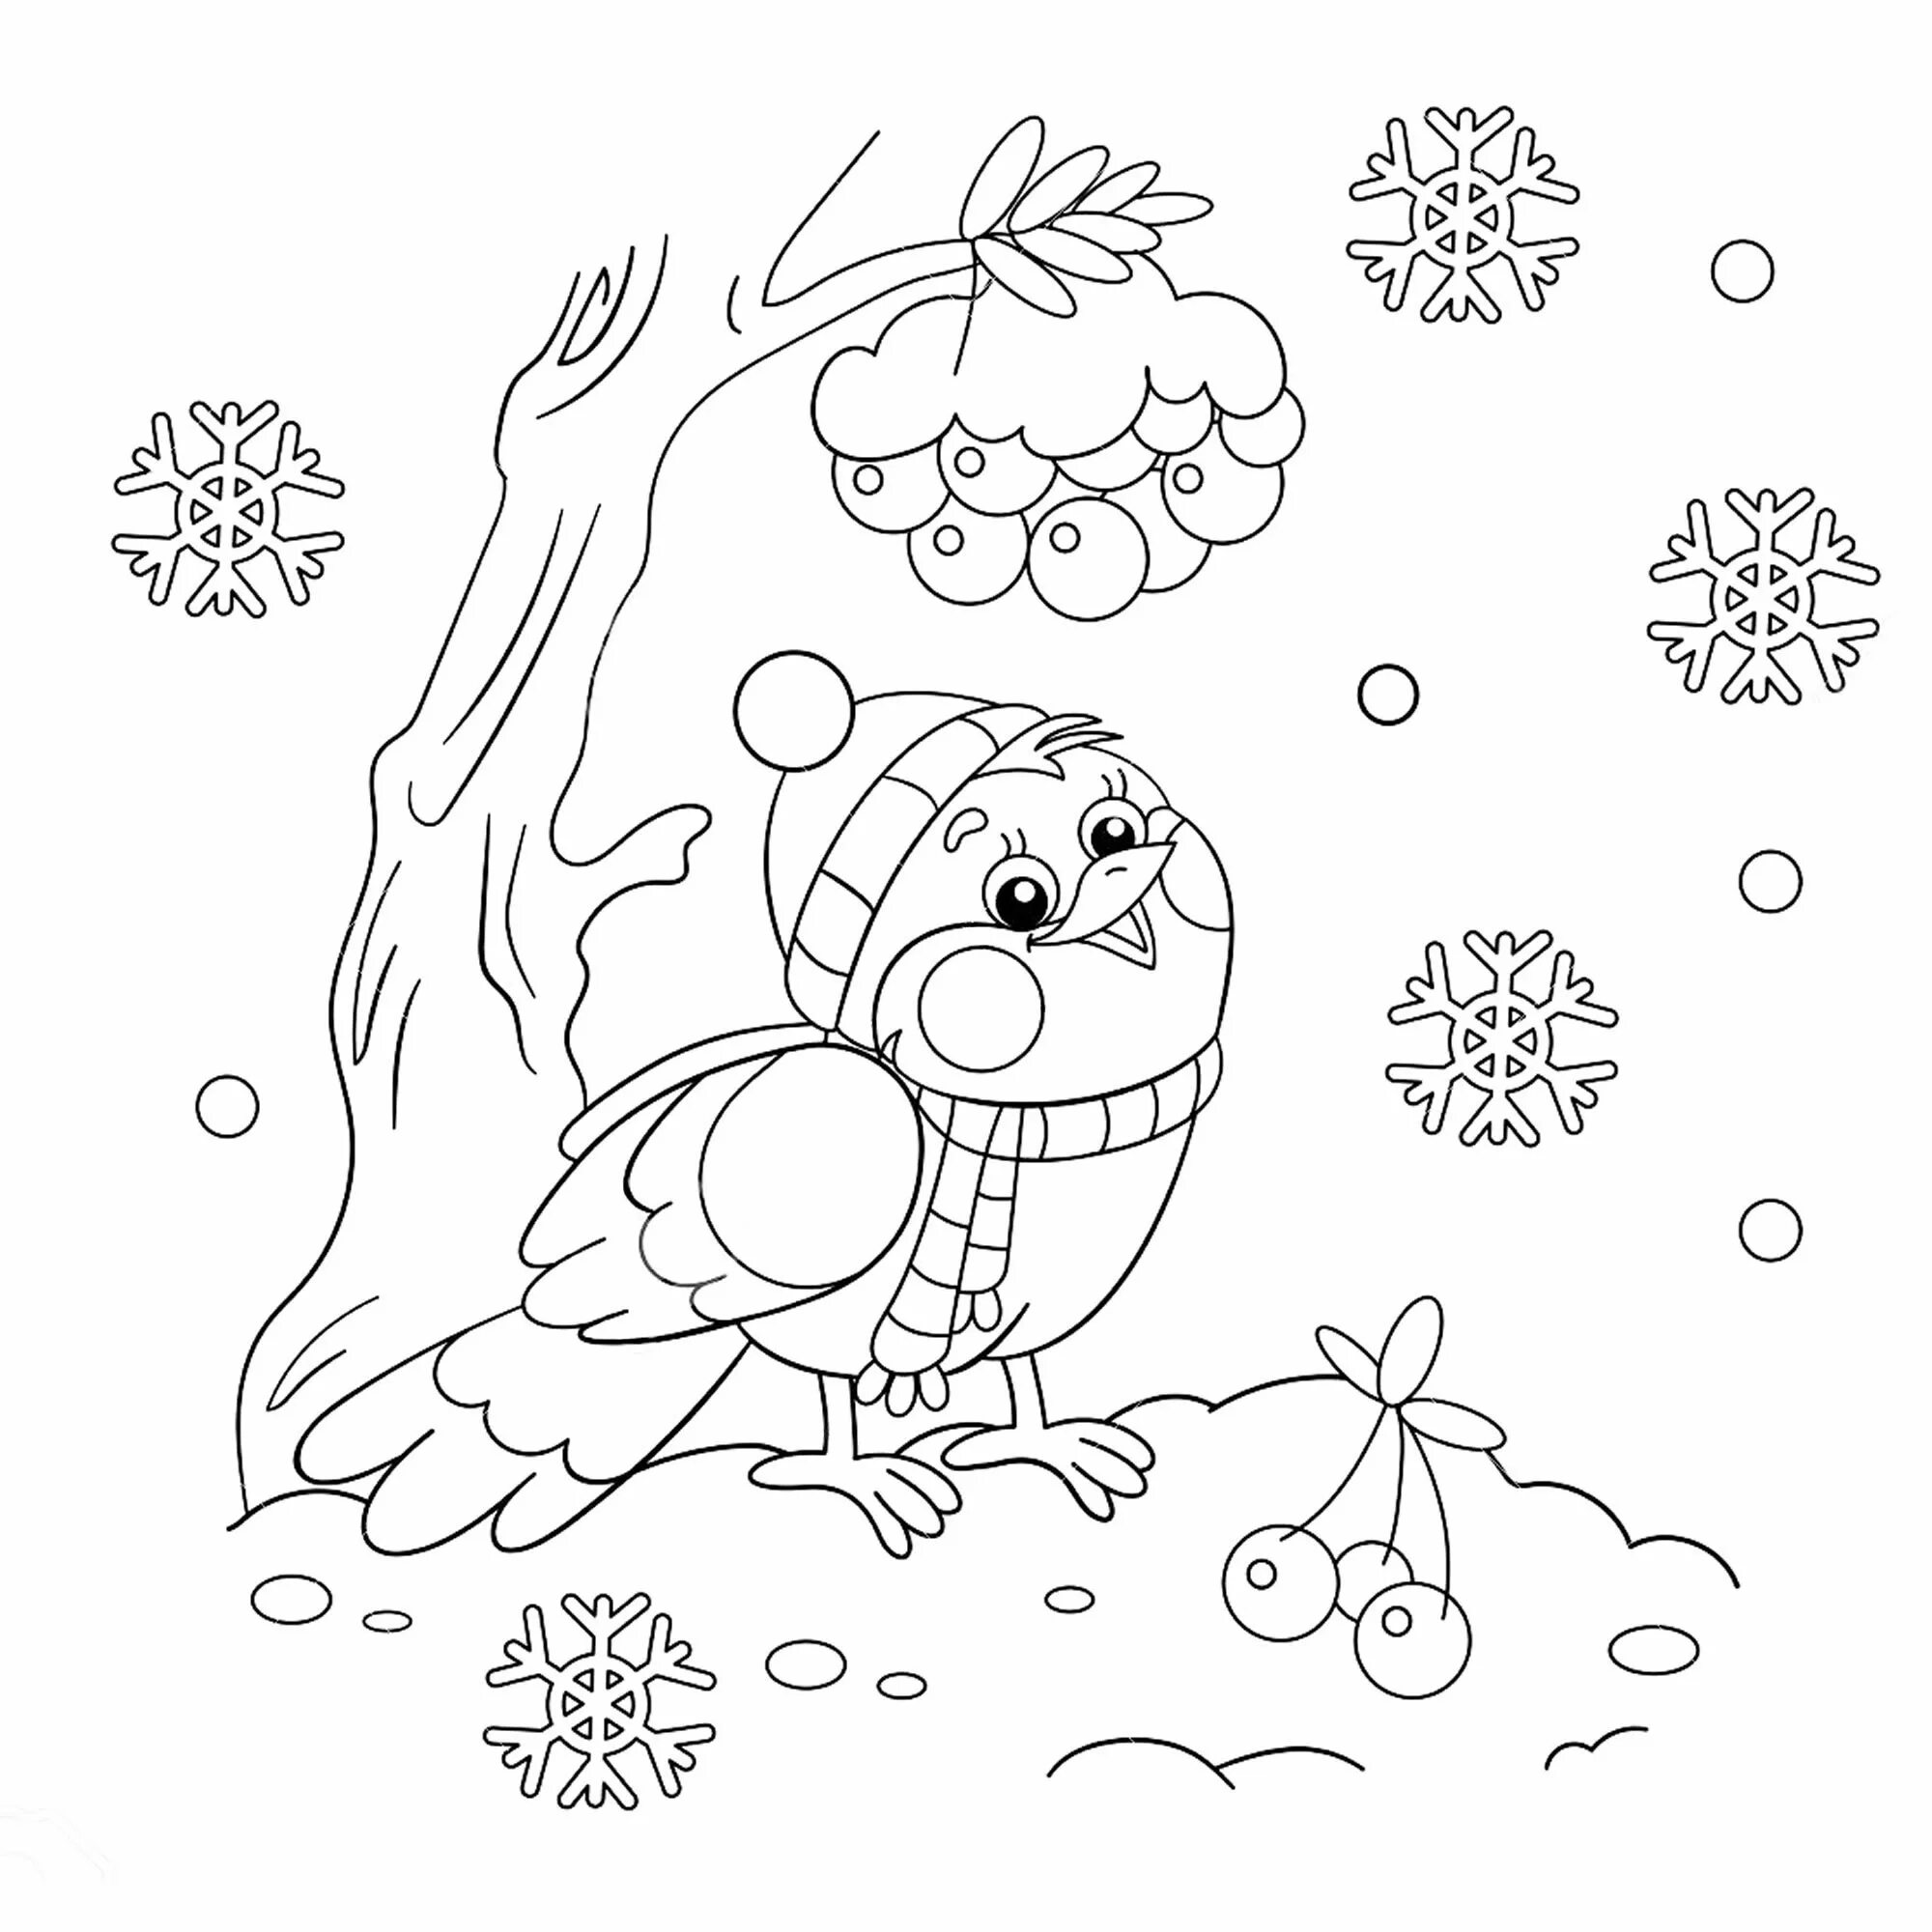 Coloring page glorious winter birds